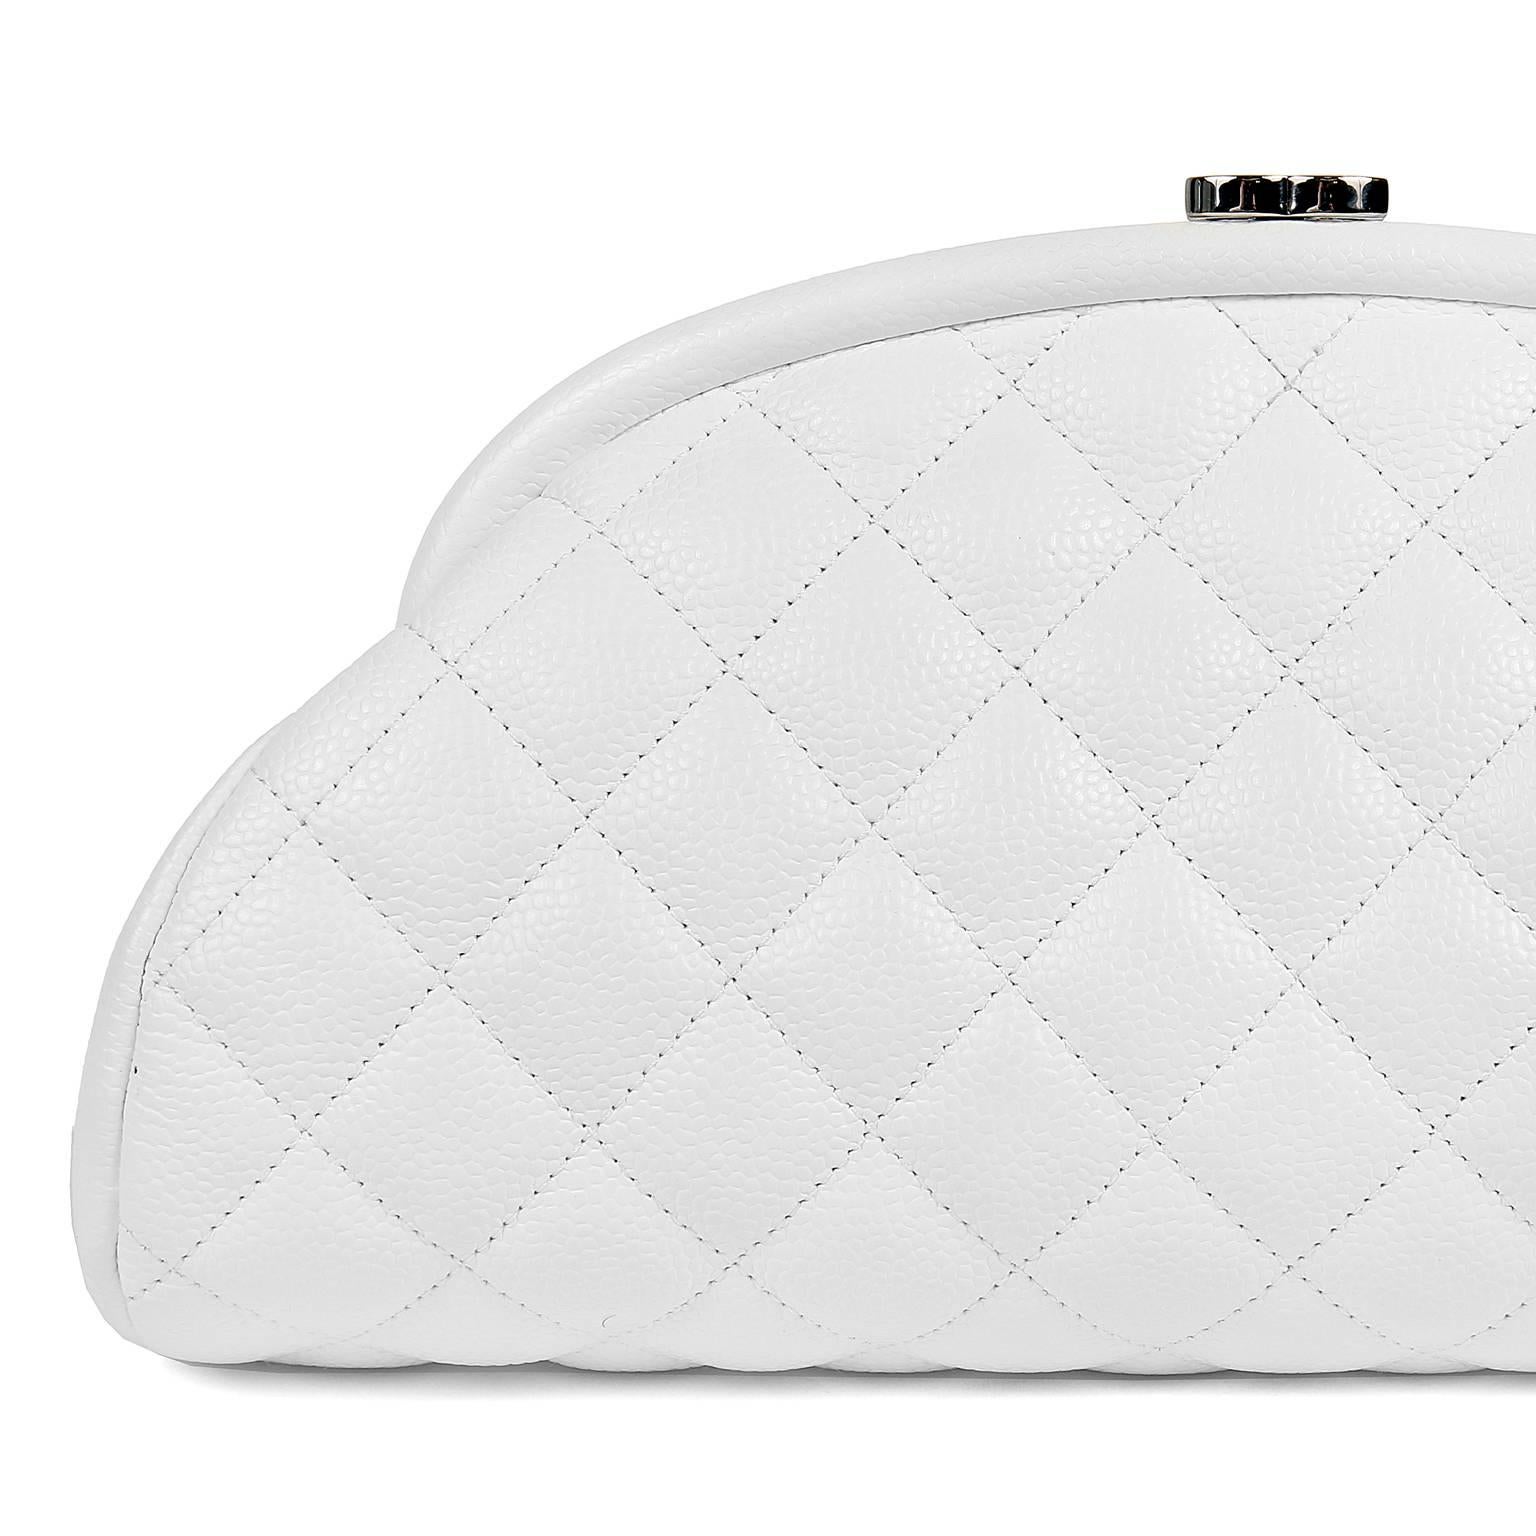 Women's Chanel White Caviar Leather Timeless Clutch with Silver Hardware